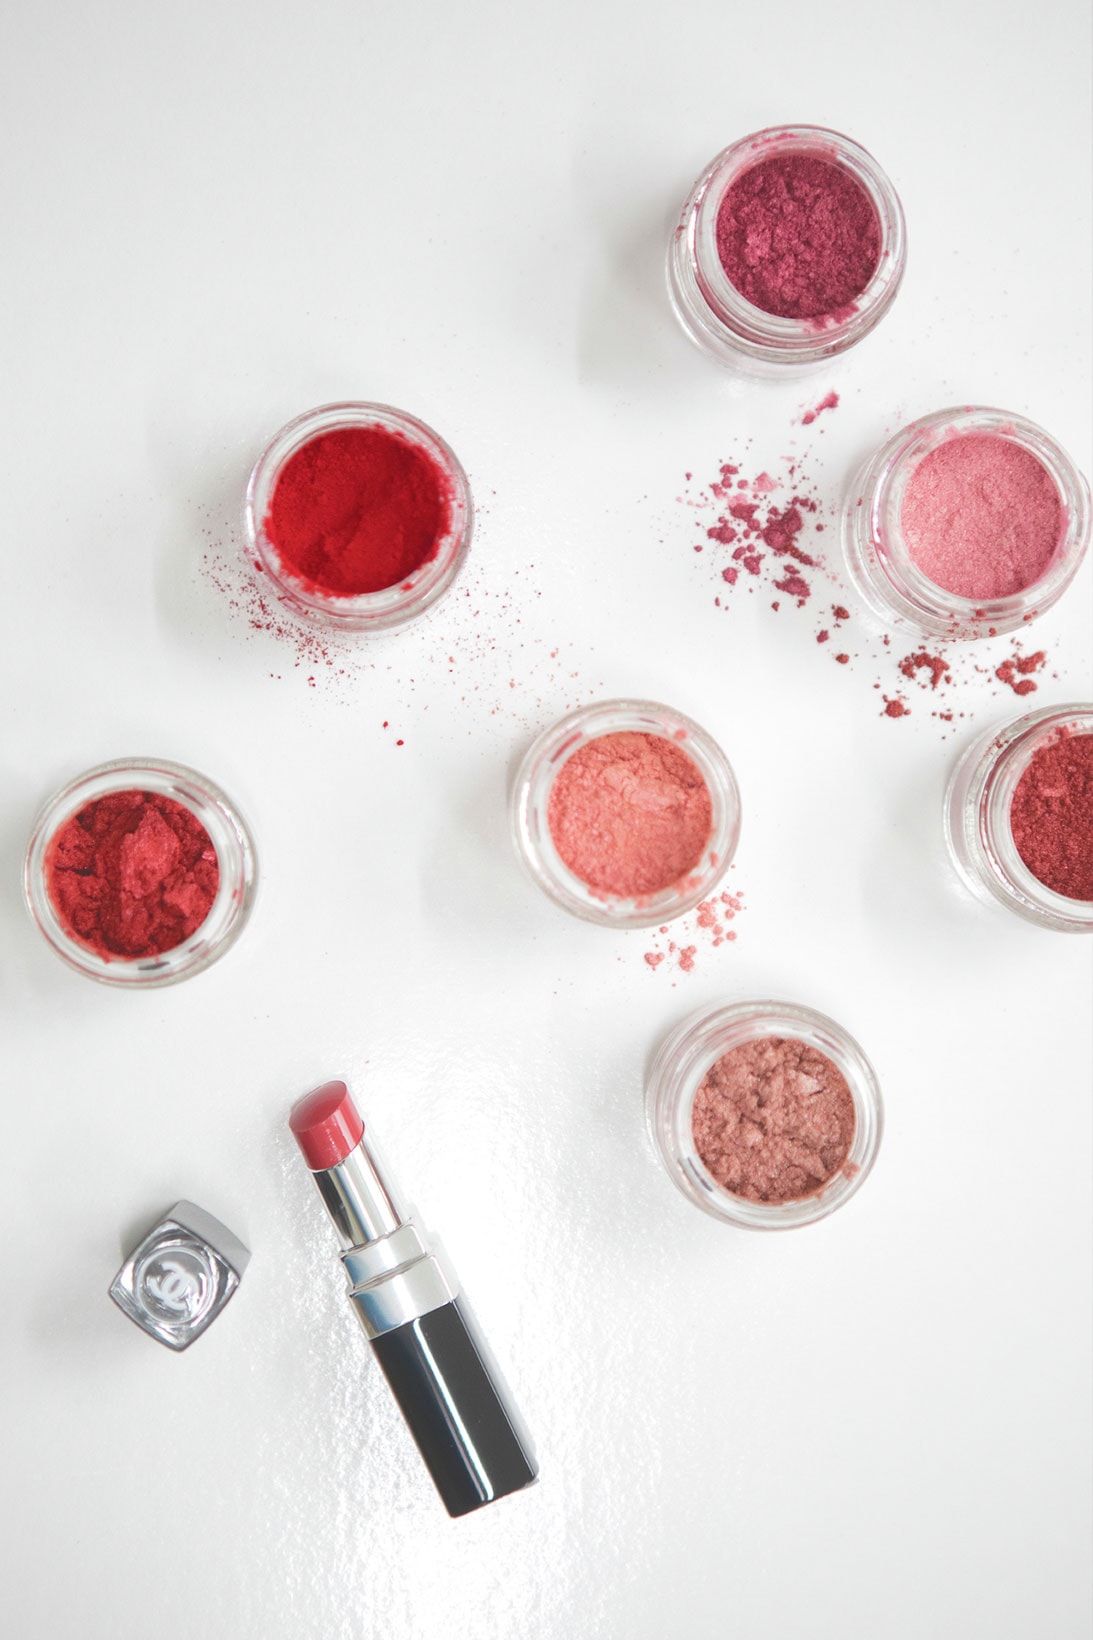 chanel beauty rouge coco bloom lipstick pigments makeup